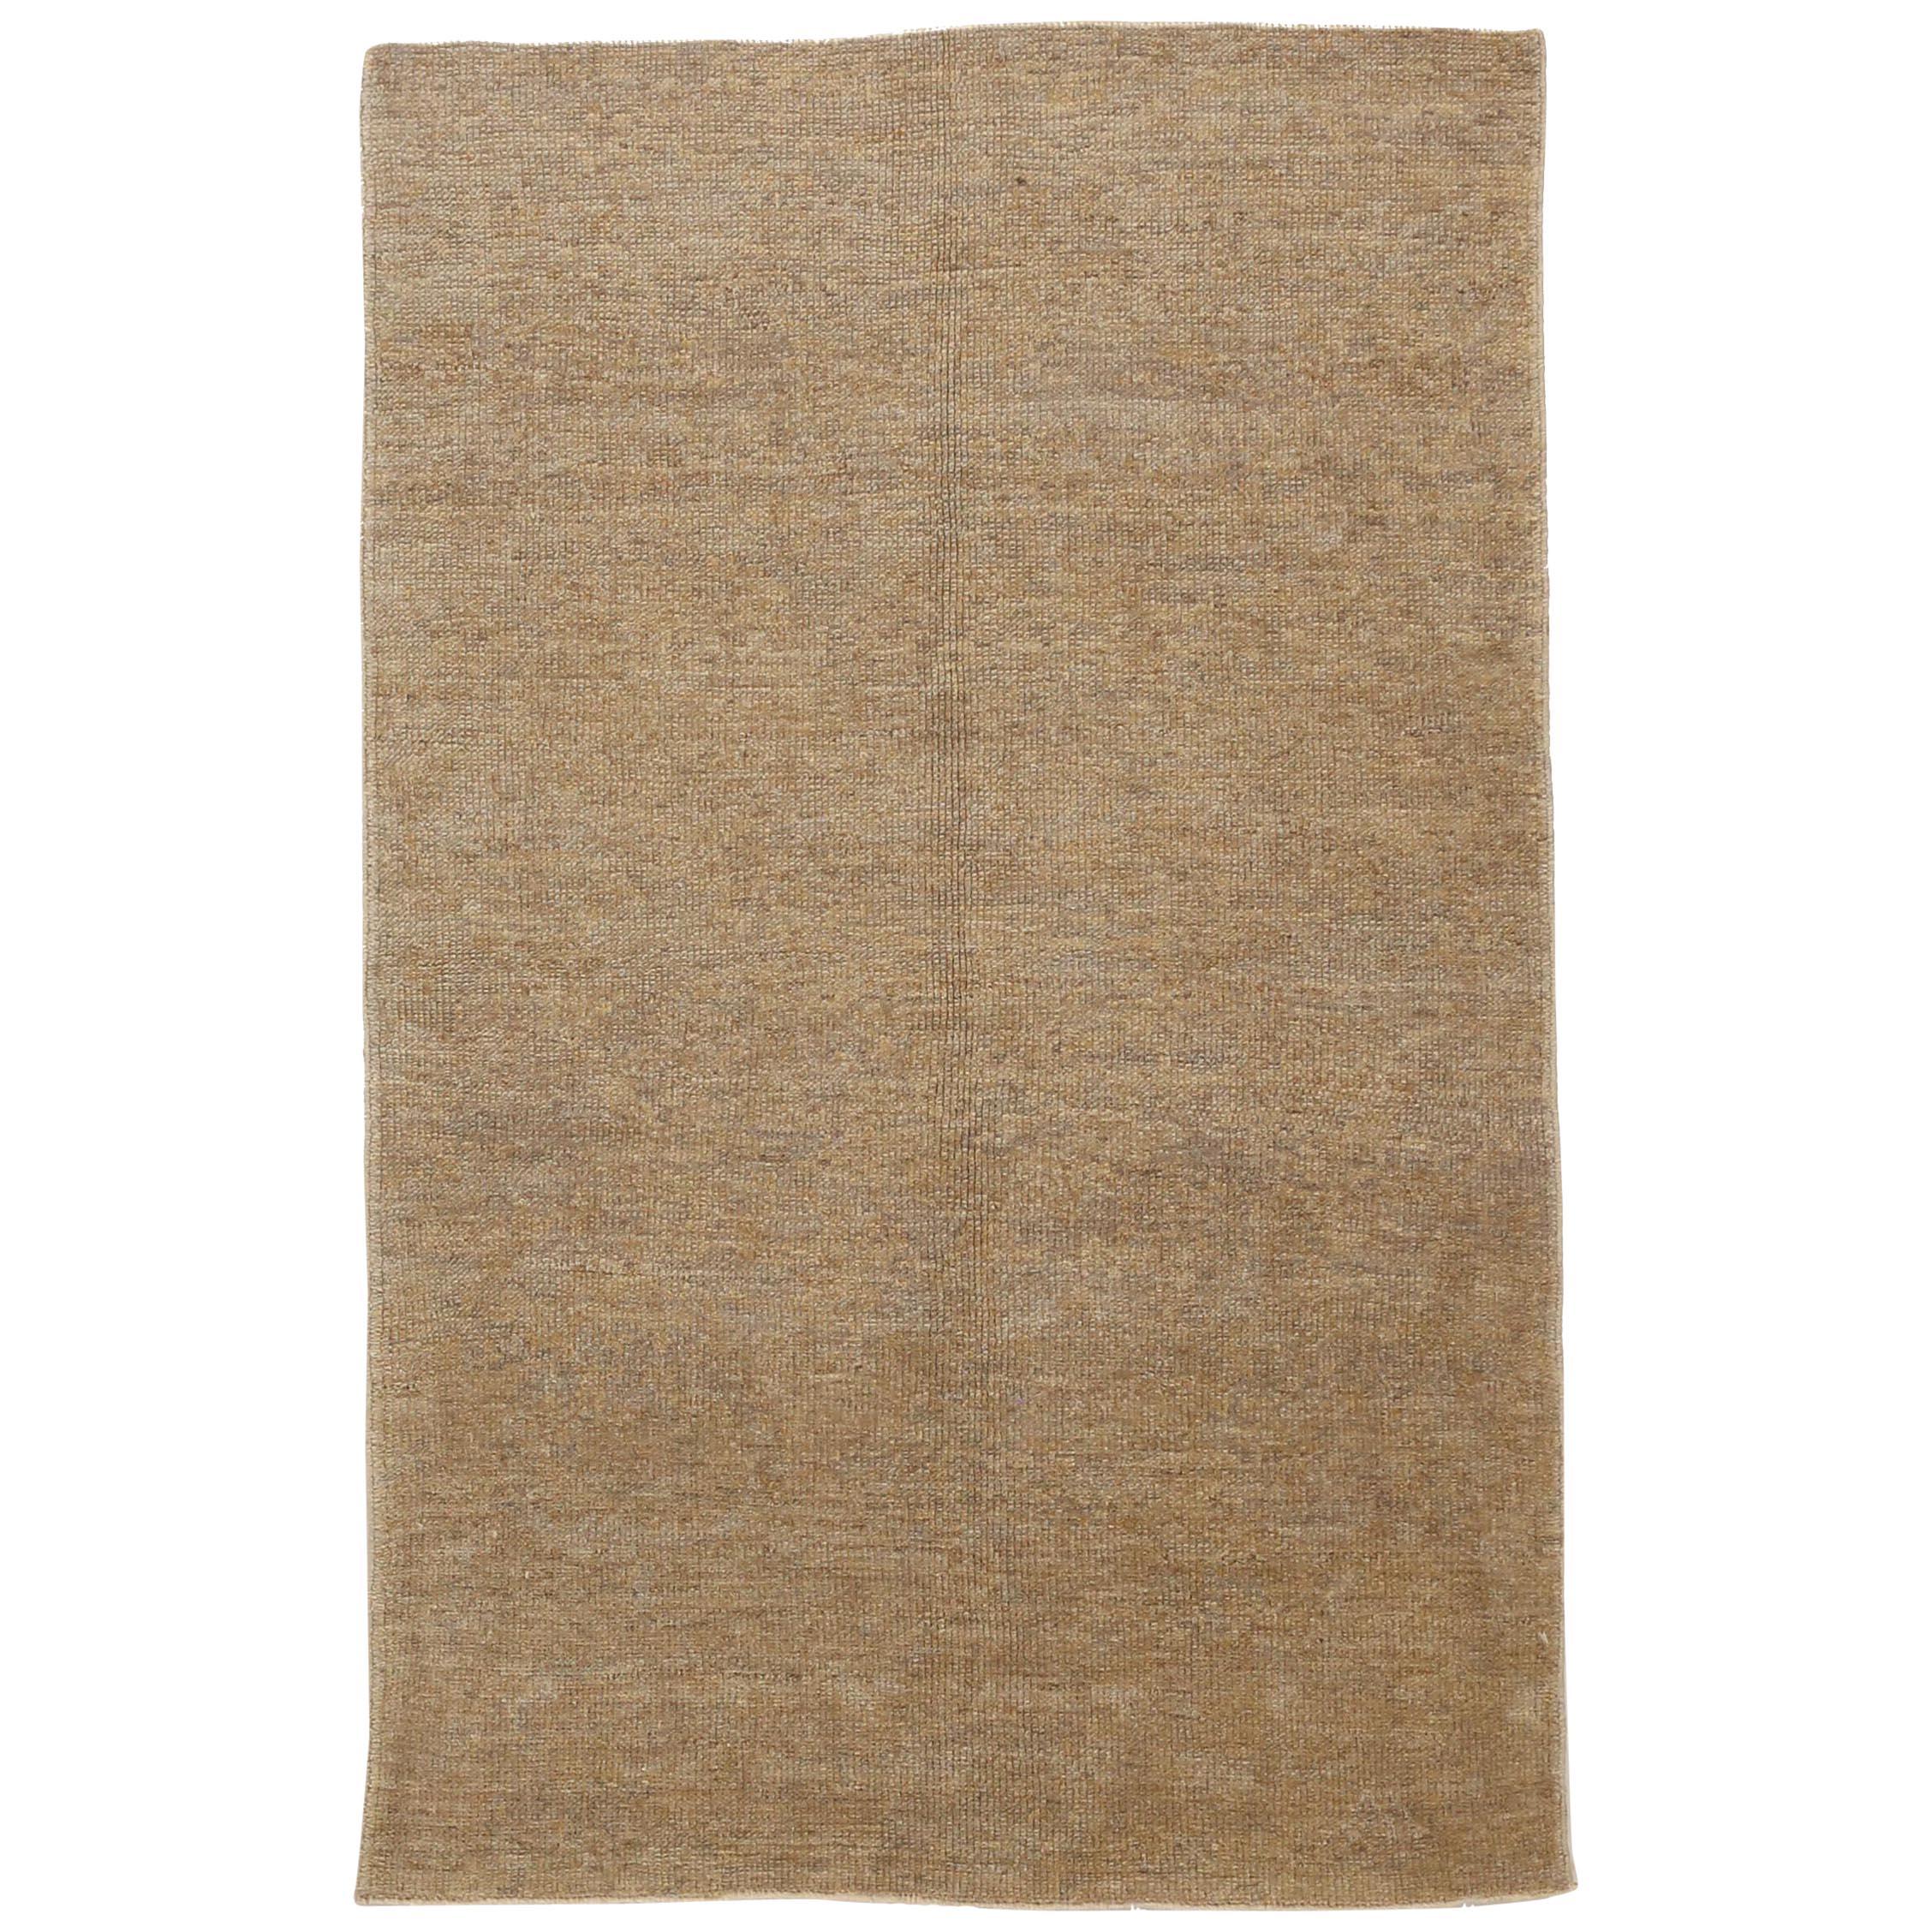 Modern Oushak Persian Rug with Hidden Floral Details in Brown and Beige